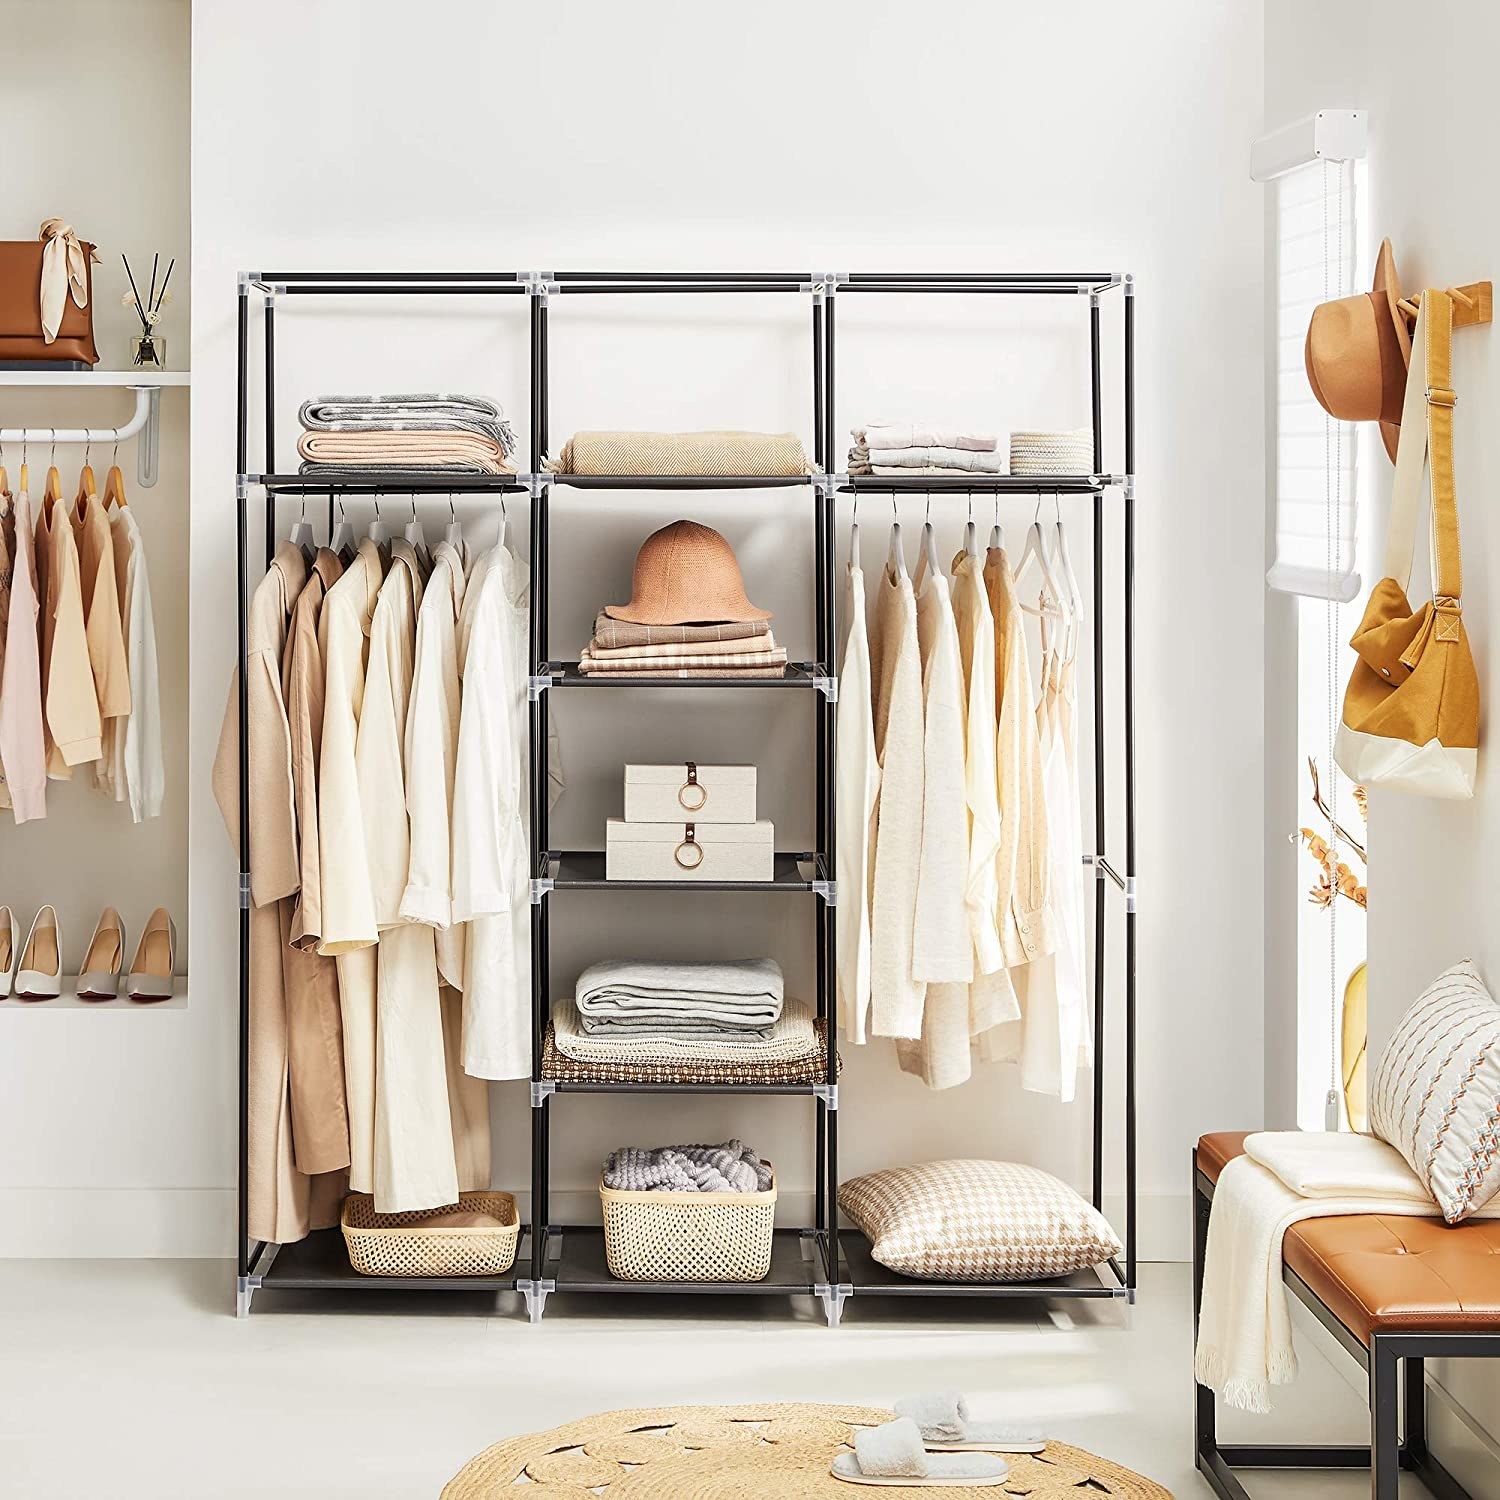 a freestanding clothing rack